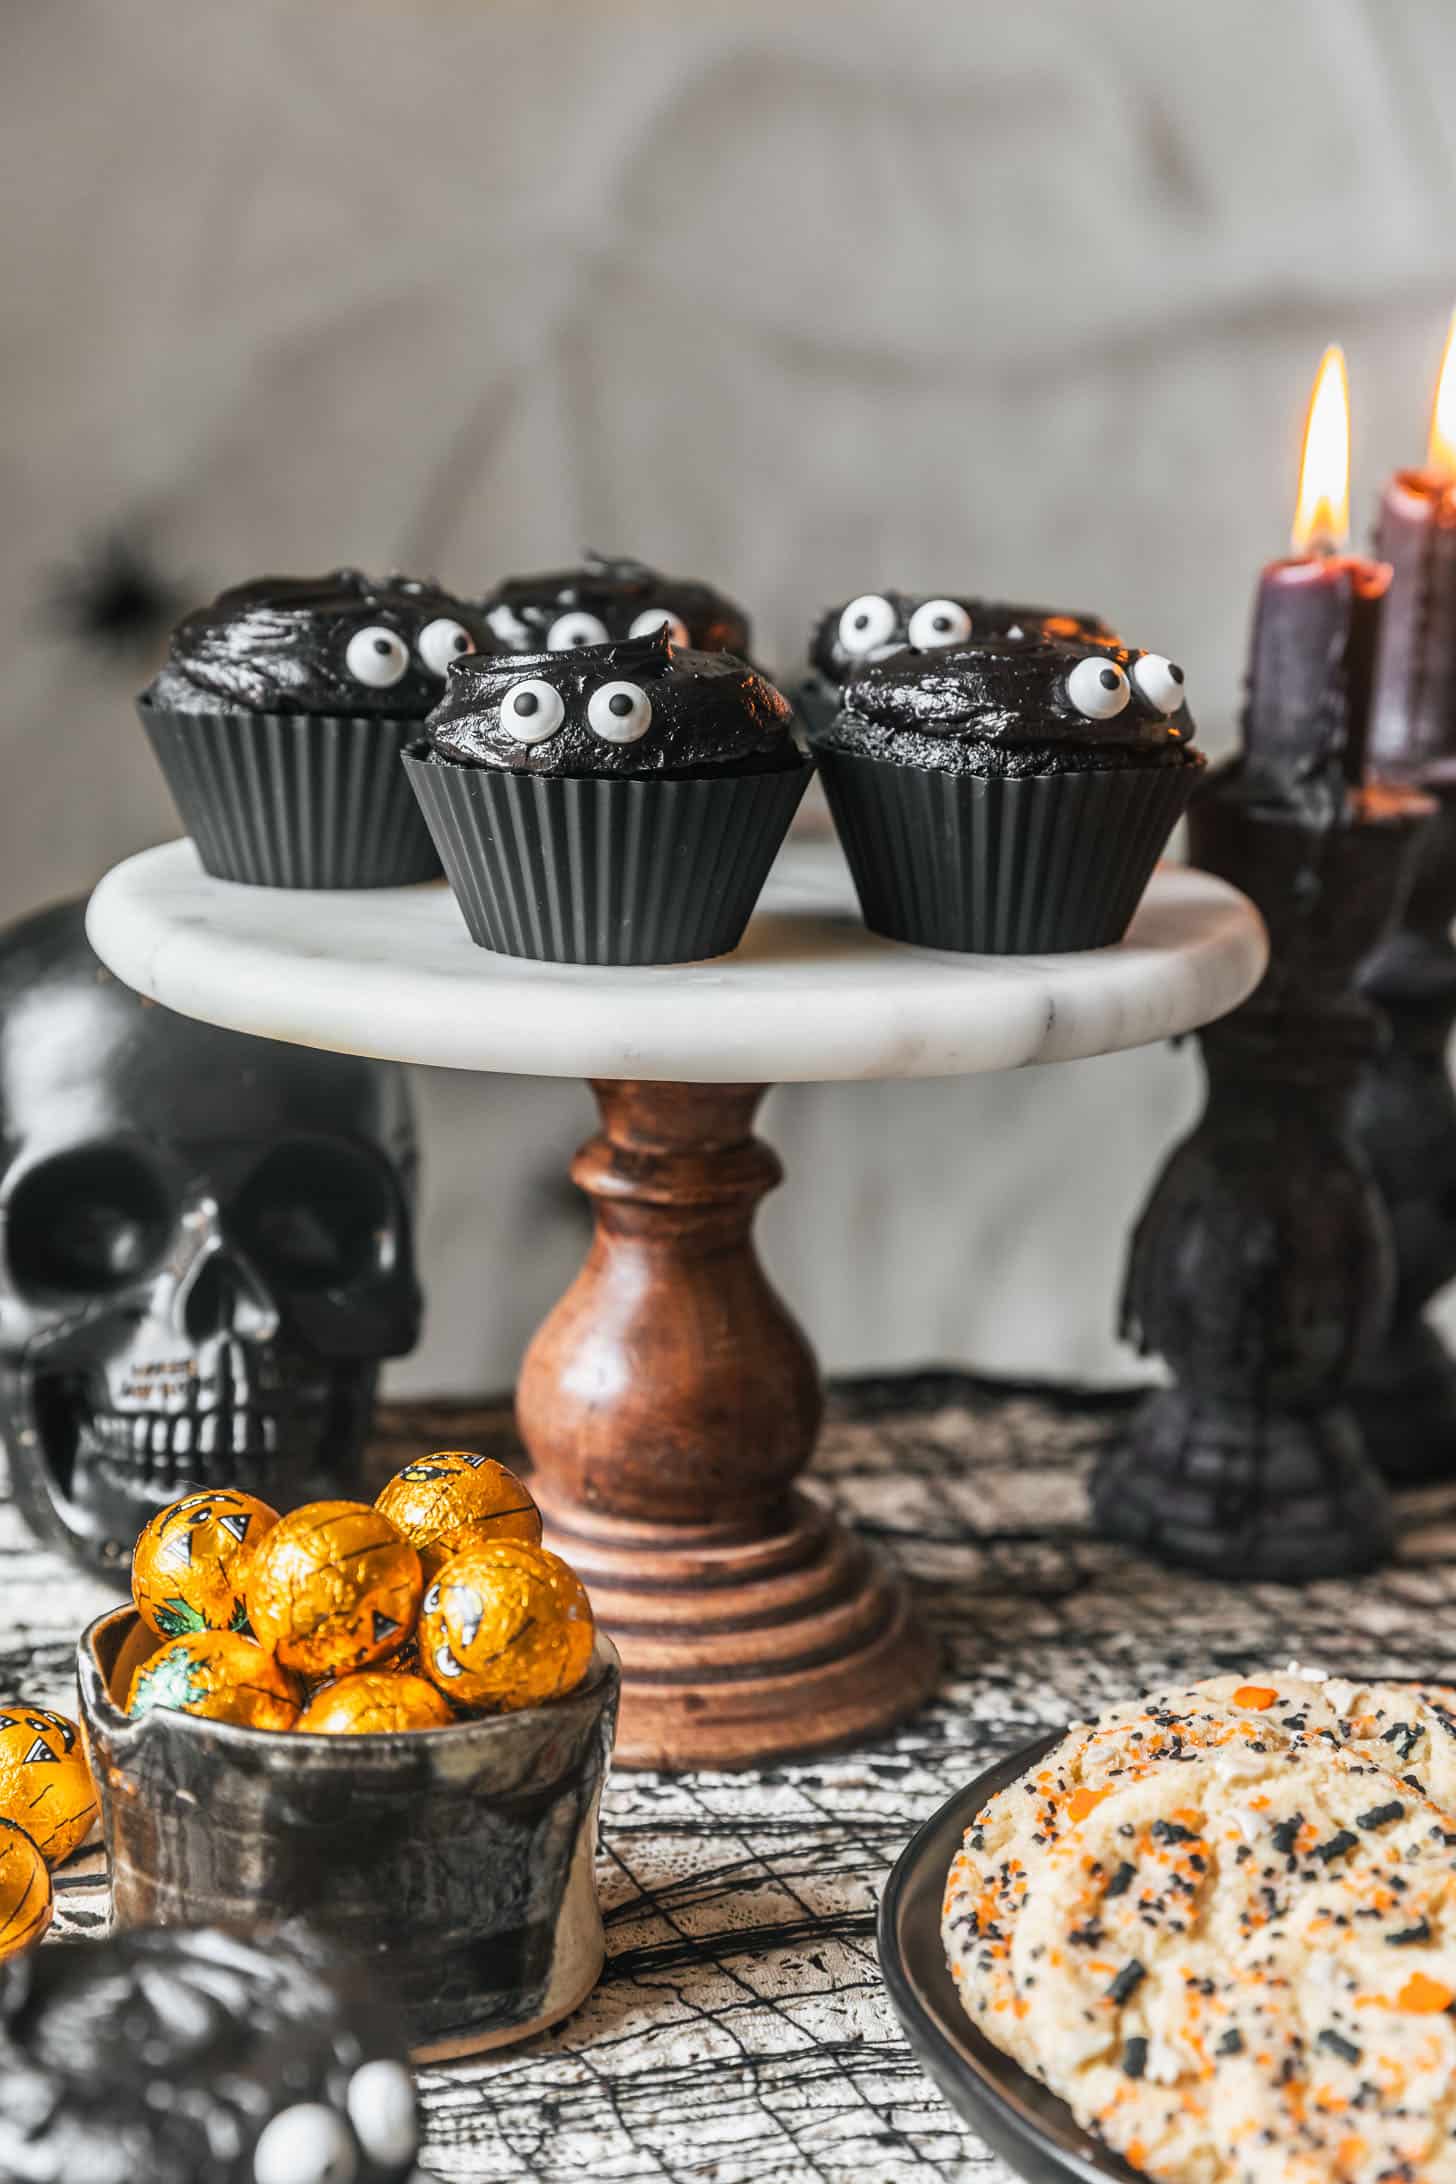 A marble cake stand with black velvet cupcakes on a black lace tablecloth next to black candles, a black skull, a black plate of cookies, and a black bowl of chocolate pumpkin candies.